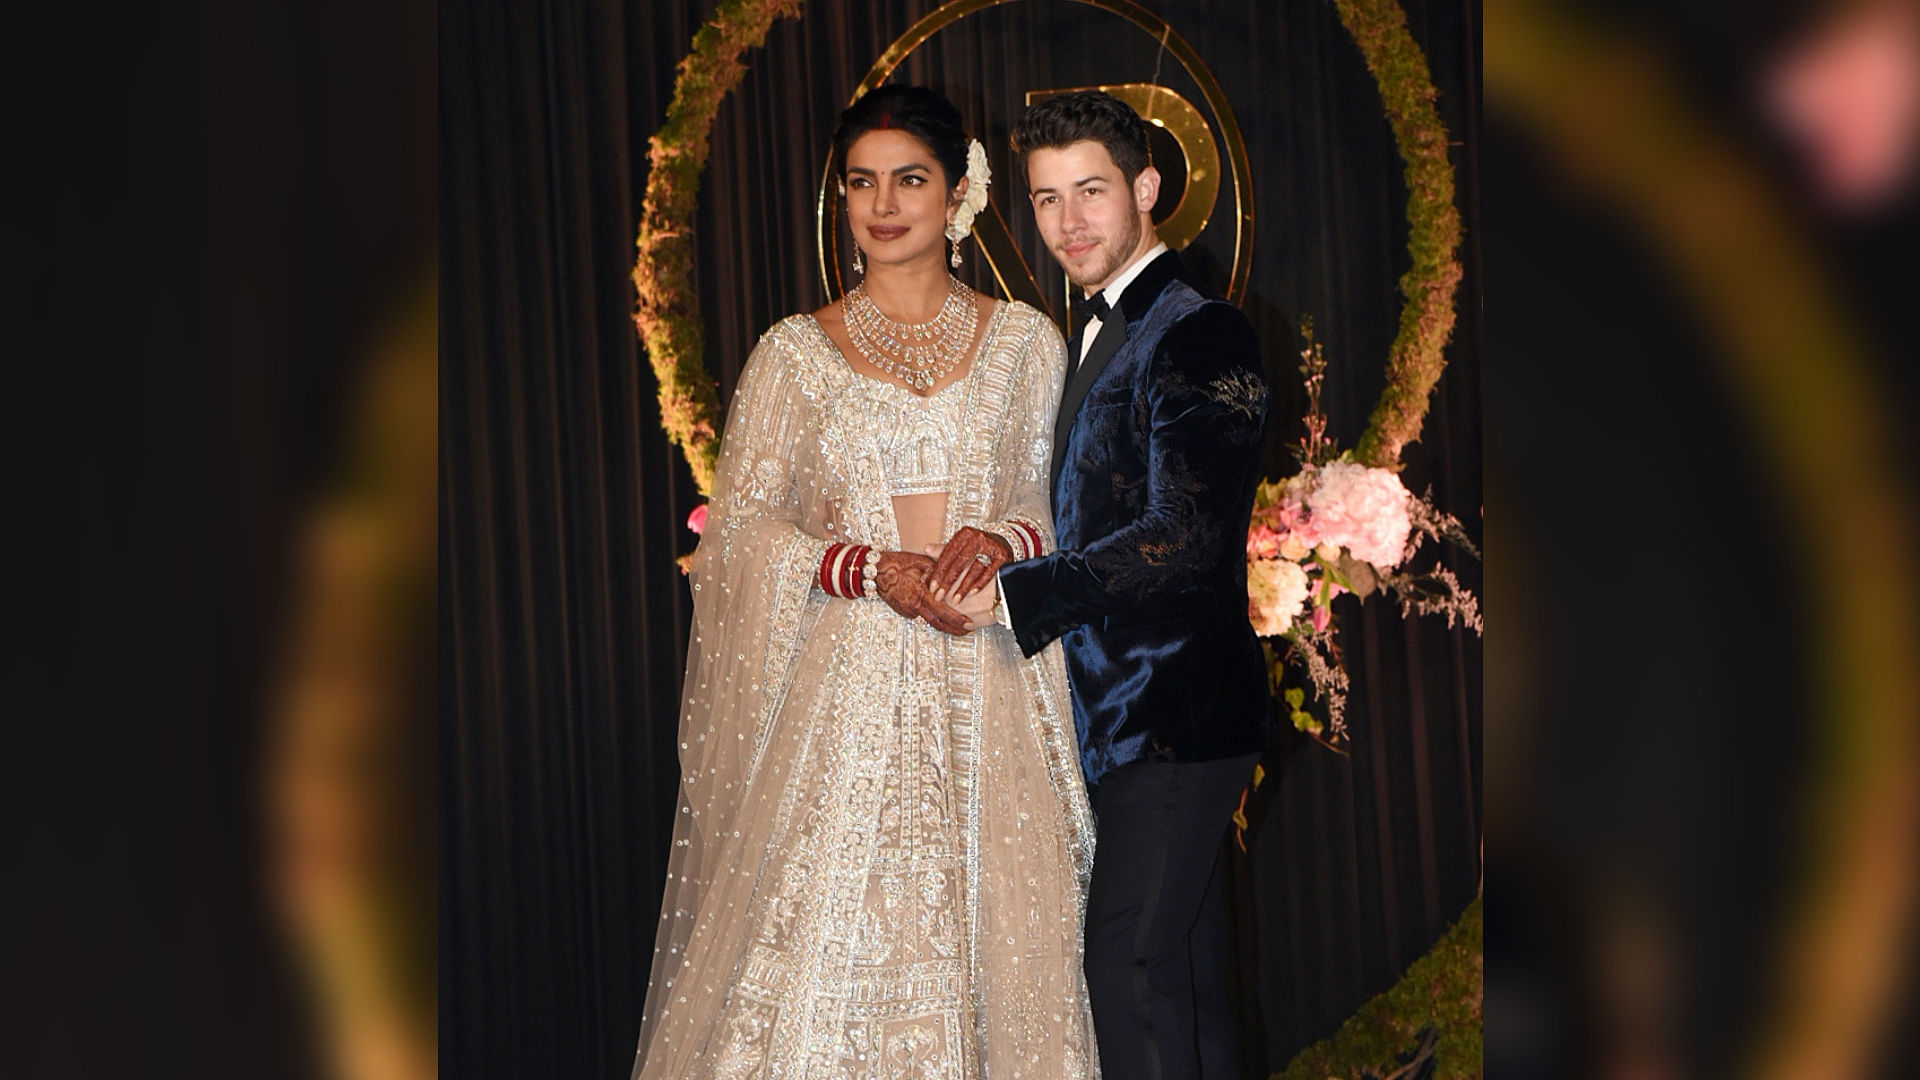 Priyanka and Nick wed in two ceremonies according to Christian and Hindu traditions.